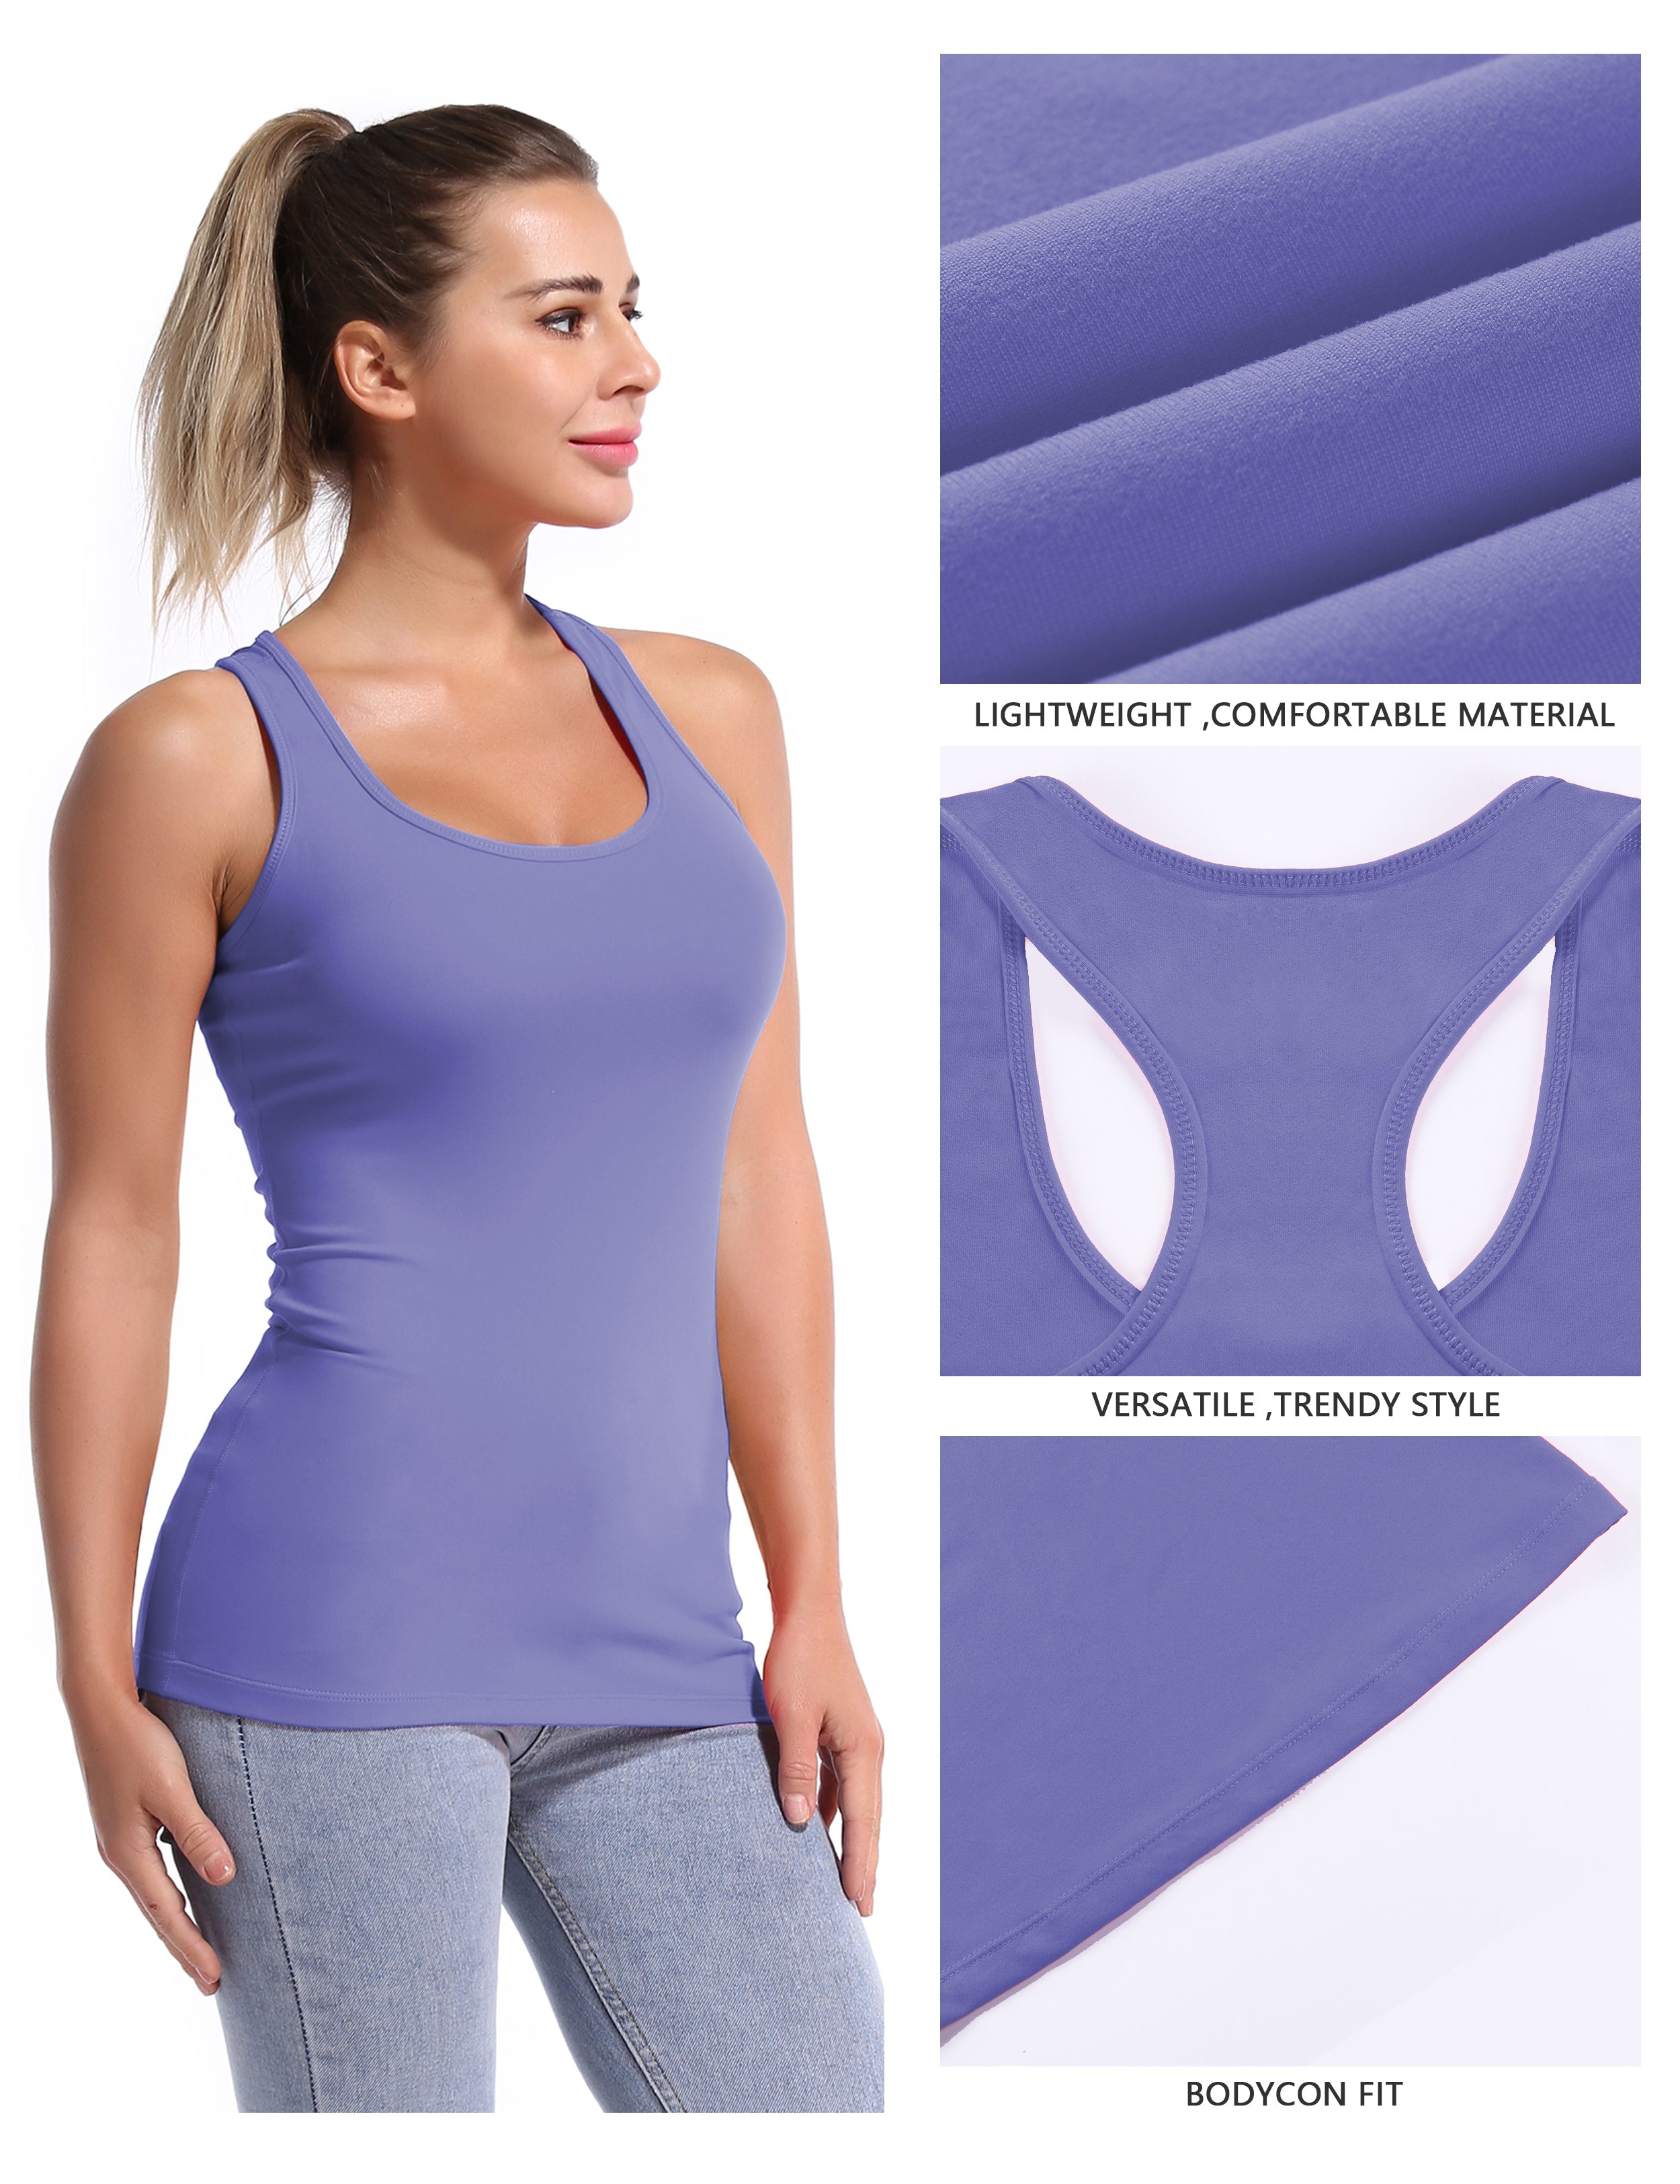 Racerback Athletic Tank Tops lavender 92%Nylon/8%Spandex(Cotton Soft) Designed for Jogging Tight Fit So buttery soft, it feels weightless Sweat-wicking Four-way stretch Breathable Contours your body Sits below the waistband for moderate, everyday coverage